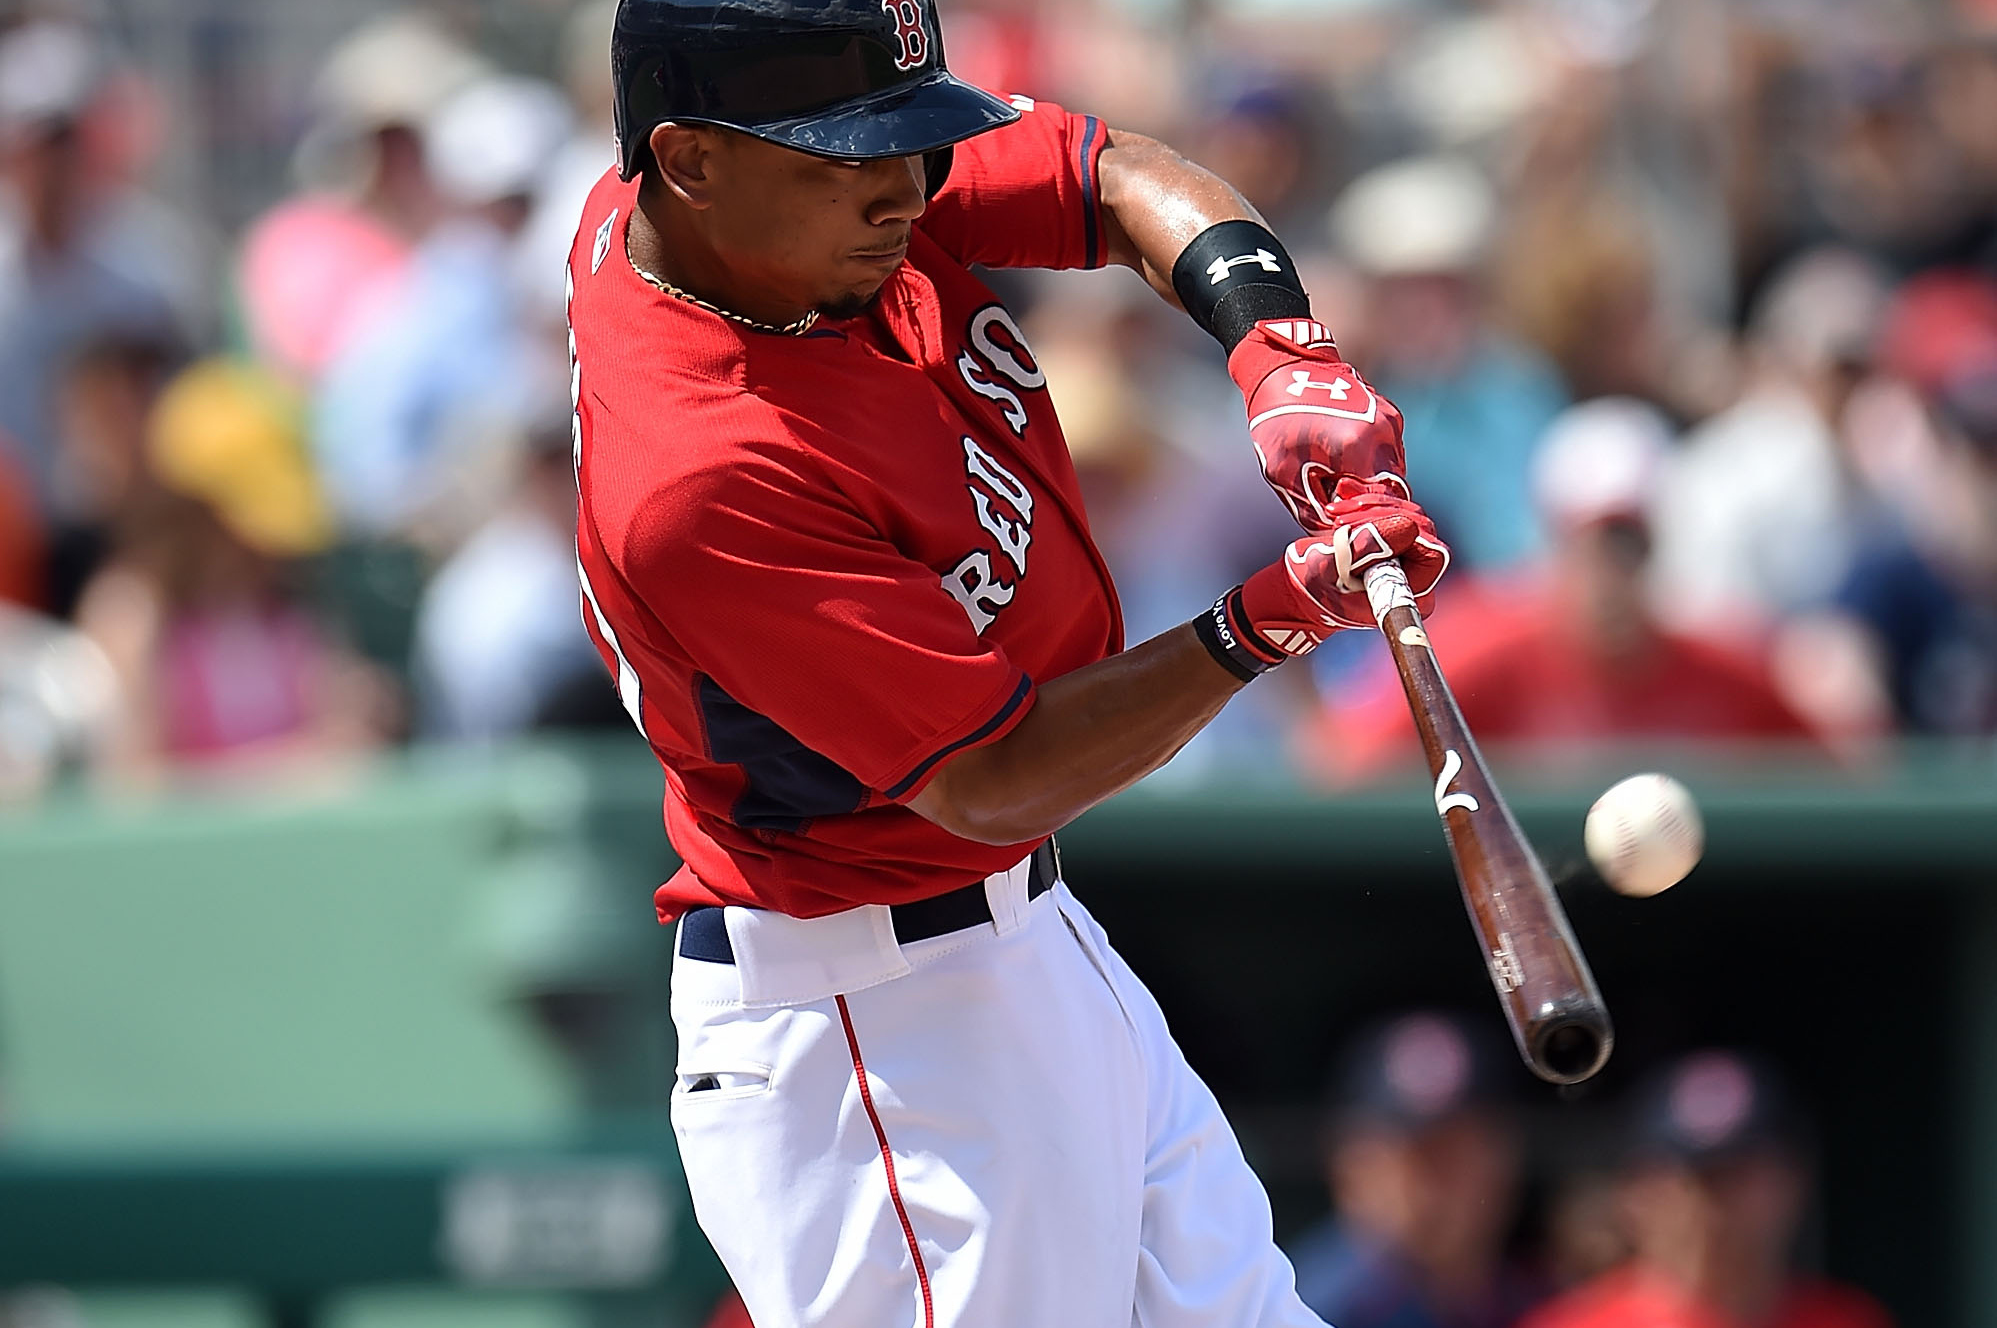 Boston Red Sox: With Mookie Betts in Center, Sox Have Terrific Outfield, News, Scores, Highlights, Stats, and Rumors